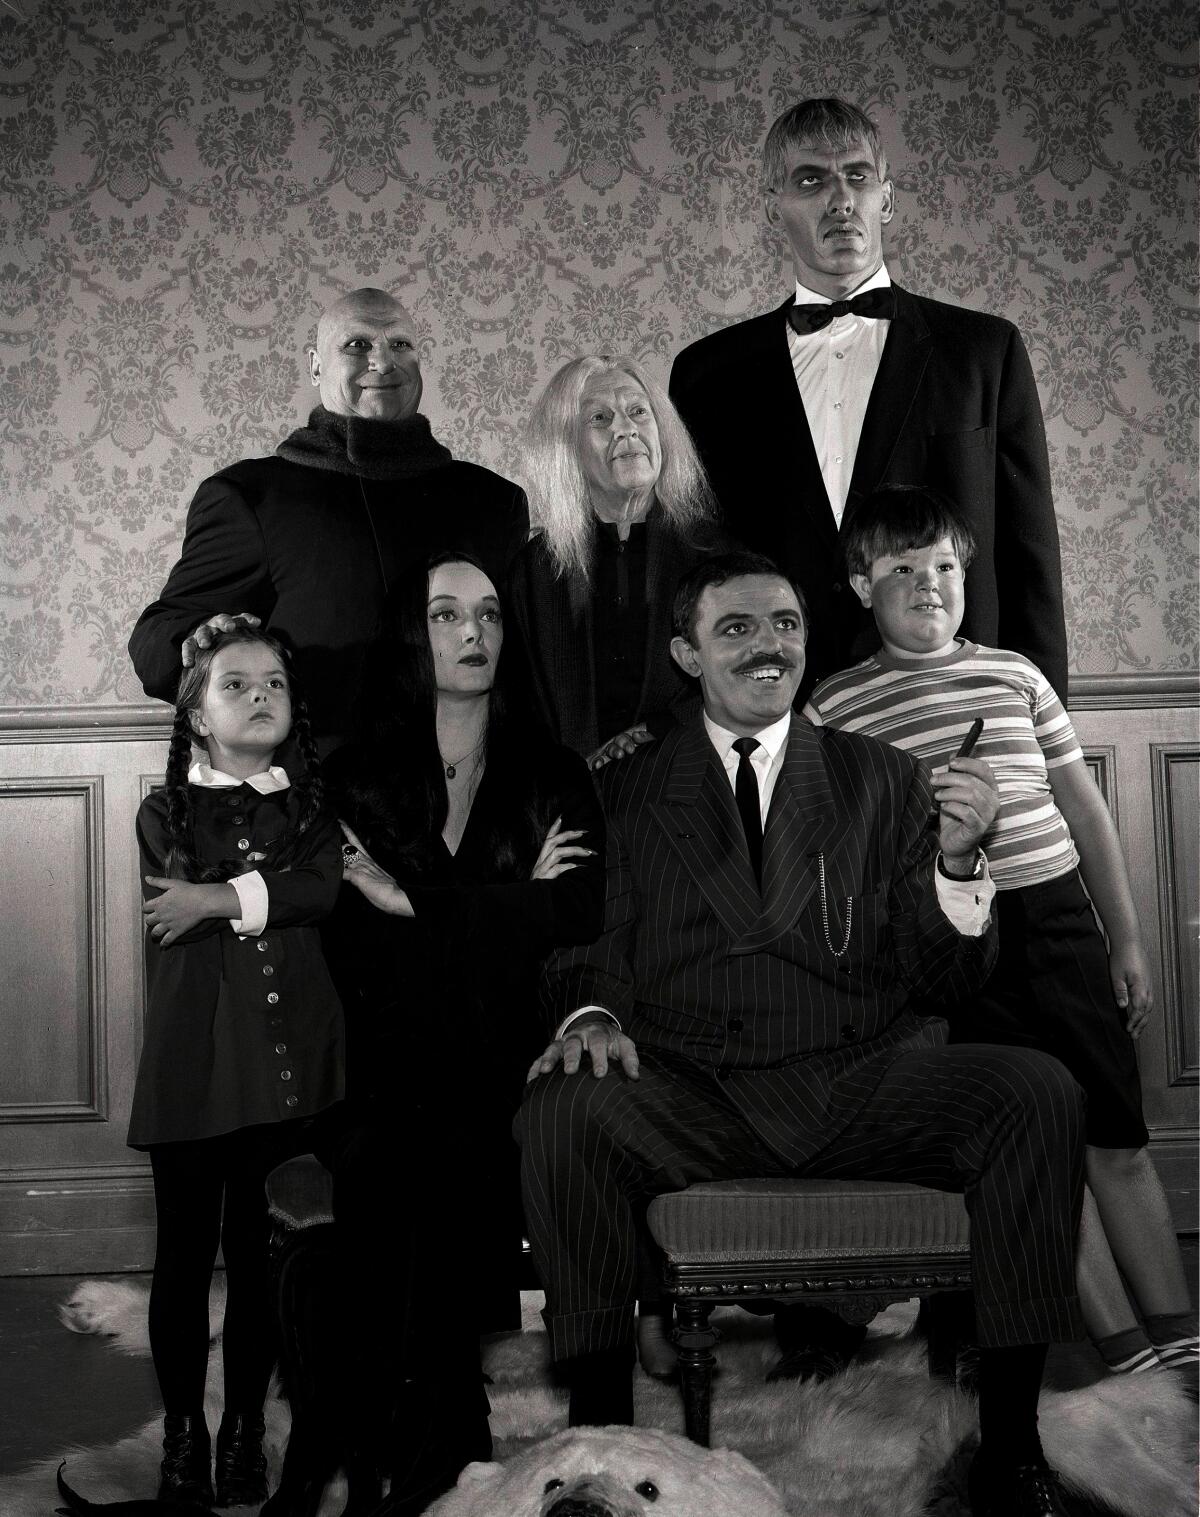 A black and white image of the title family in the 1960s sitcom "The Addams Family."